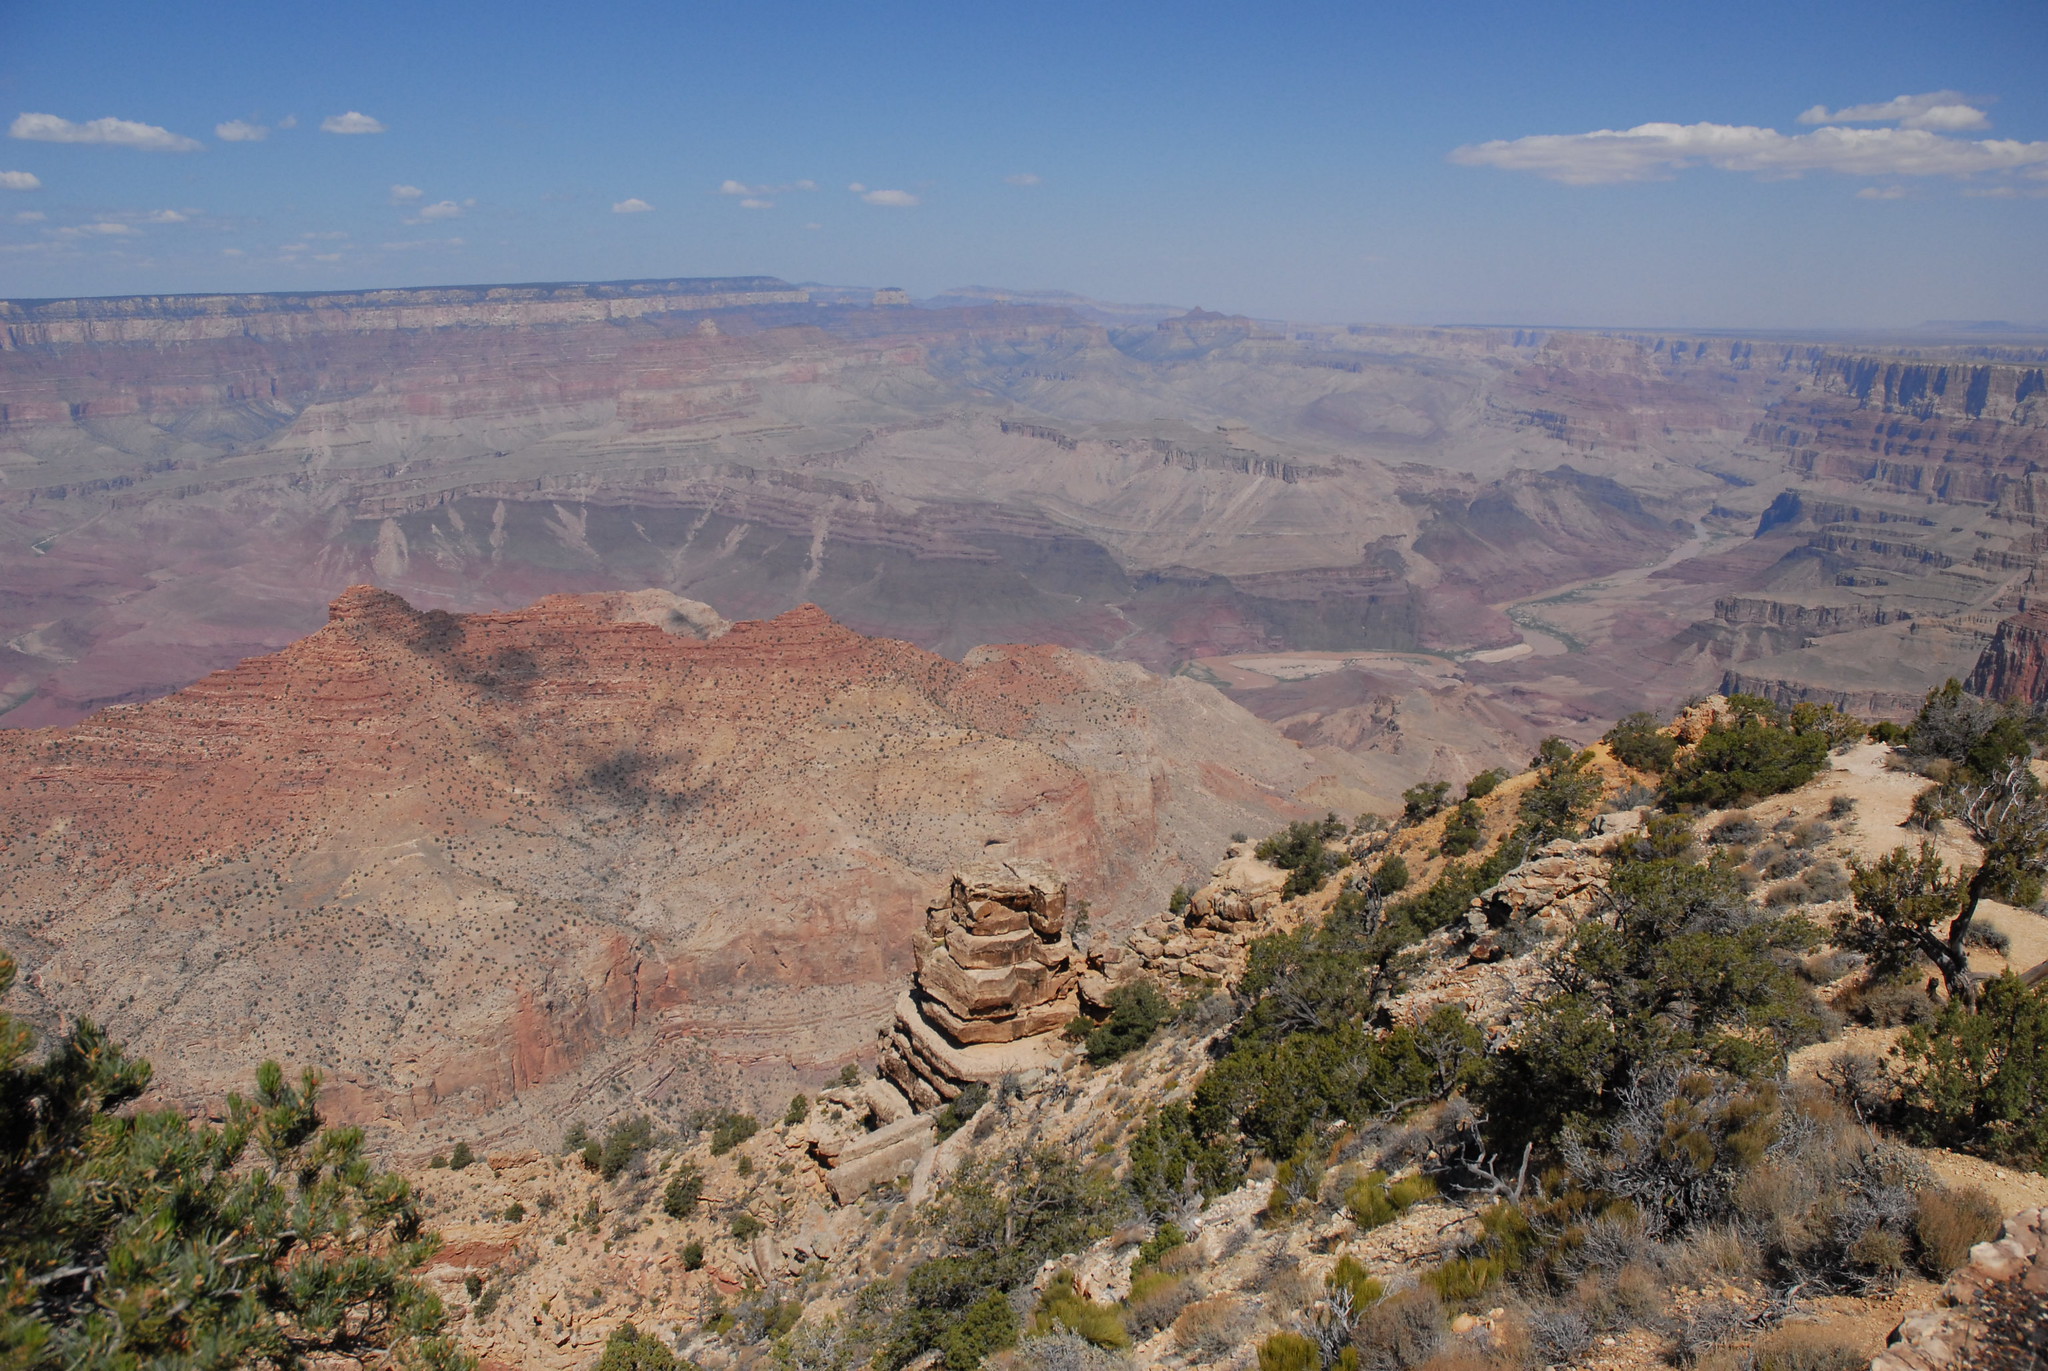 The Grand Canyon!